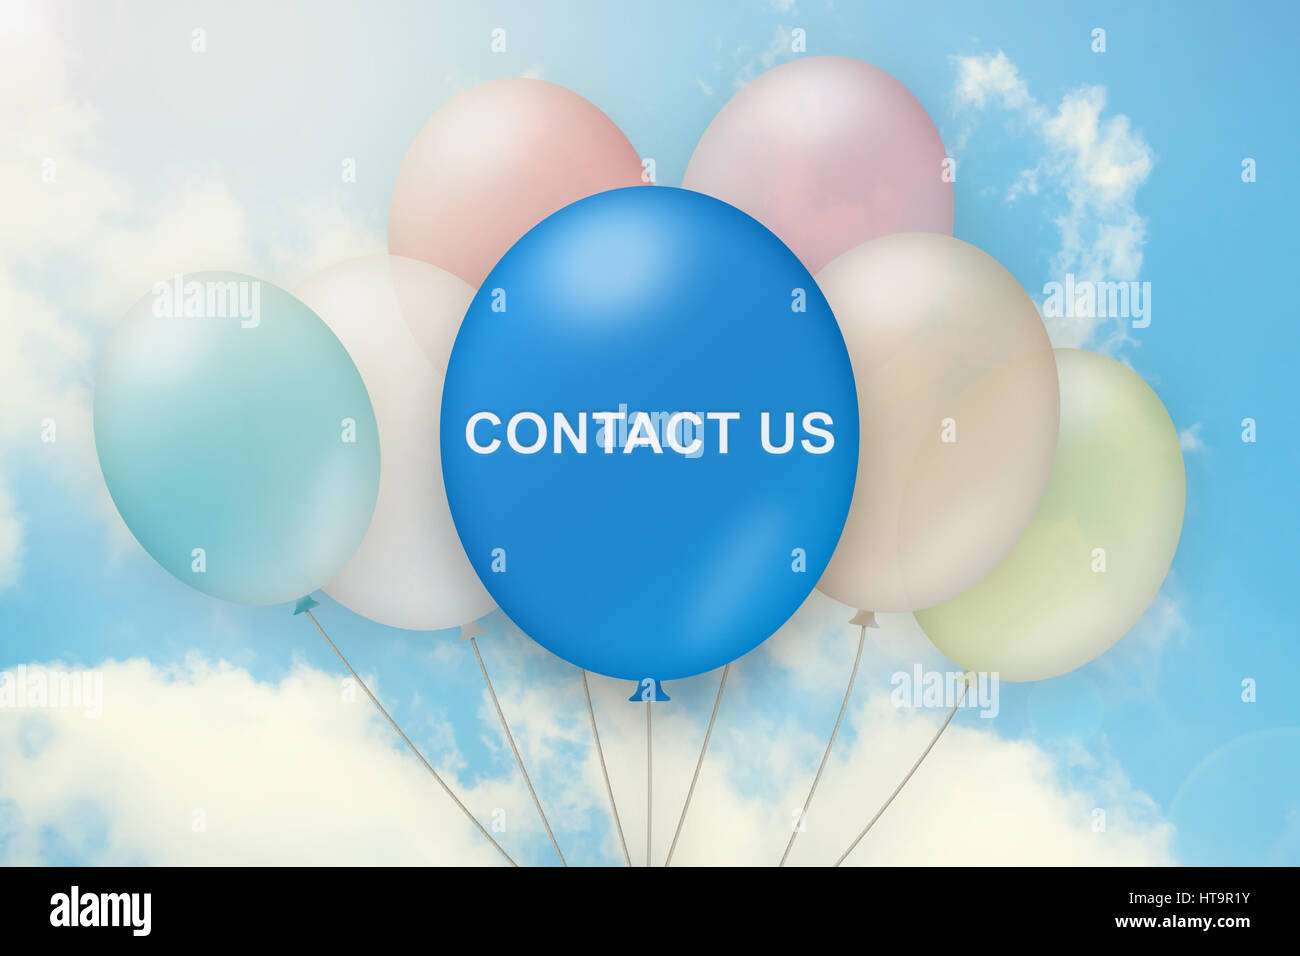 contact us on balloon with blue sky background Stock Photo